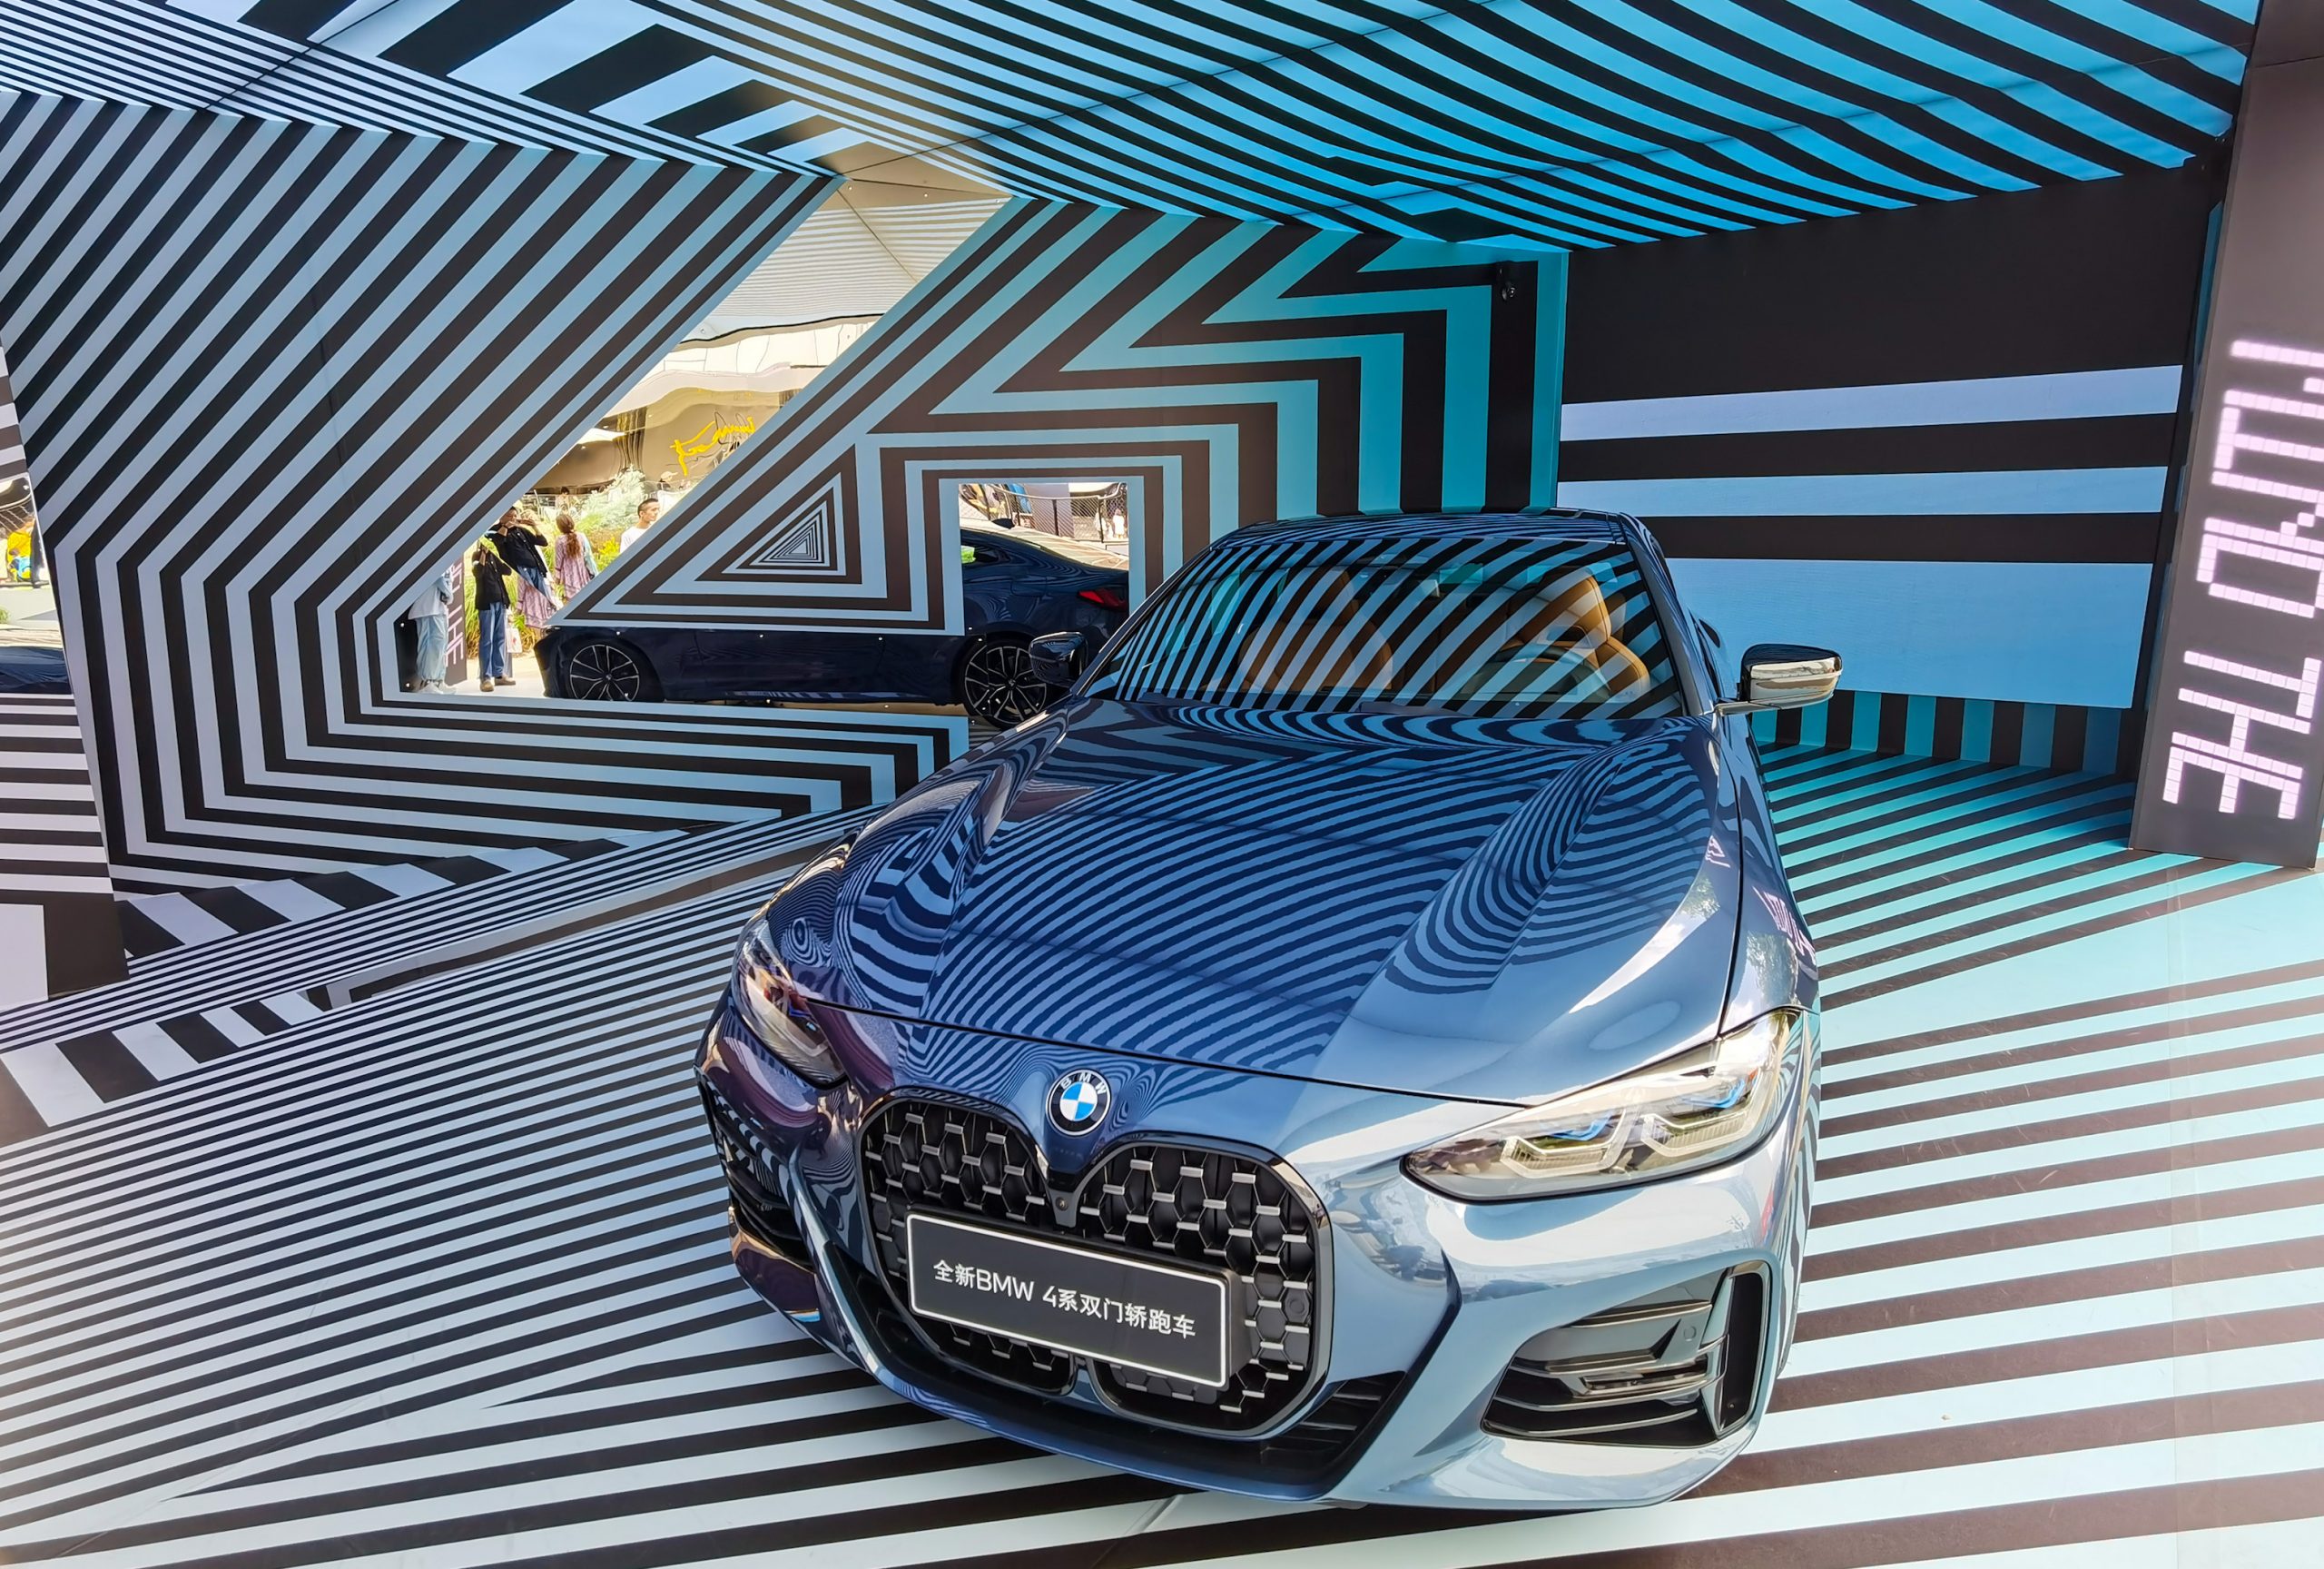 A BMW 4 Series sedan is on display at a shopping mall